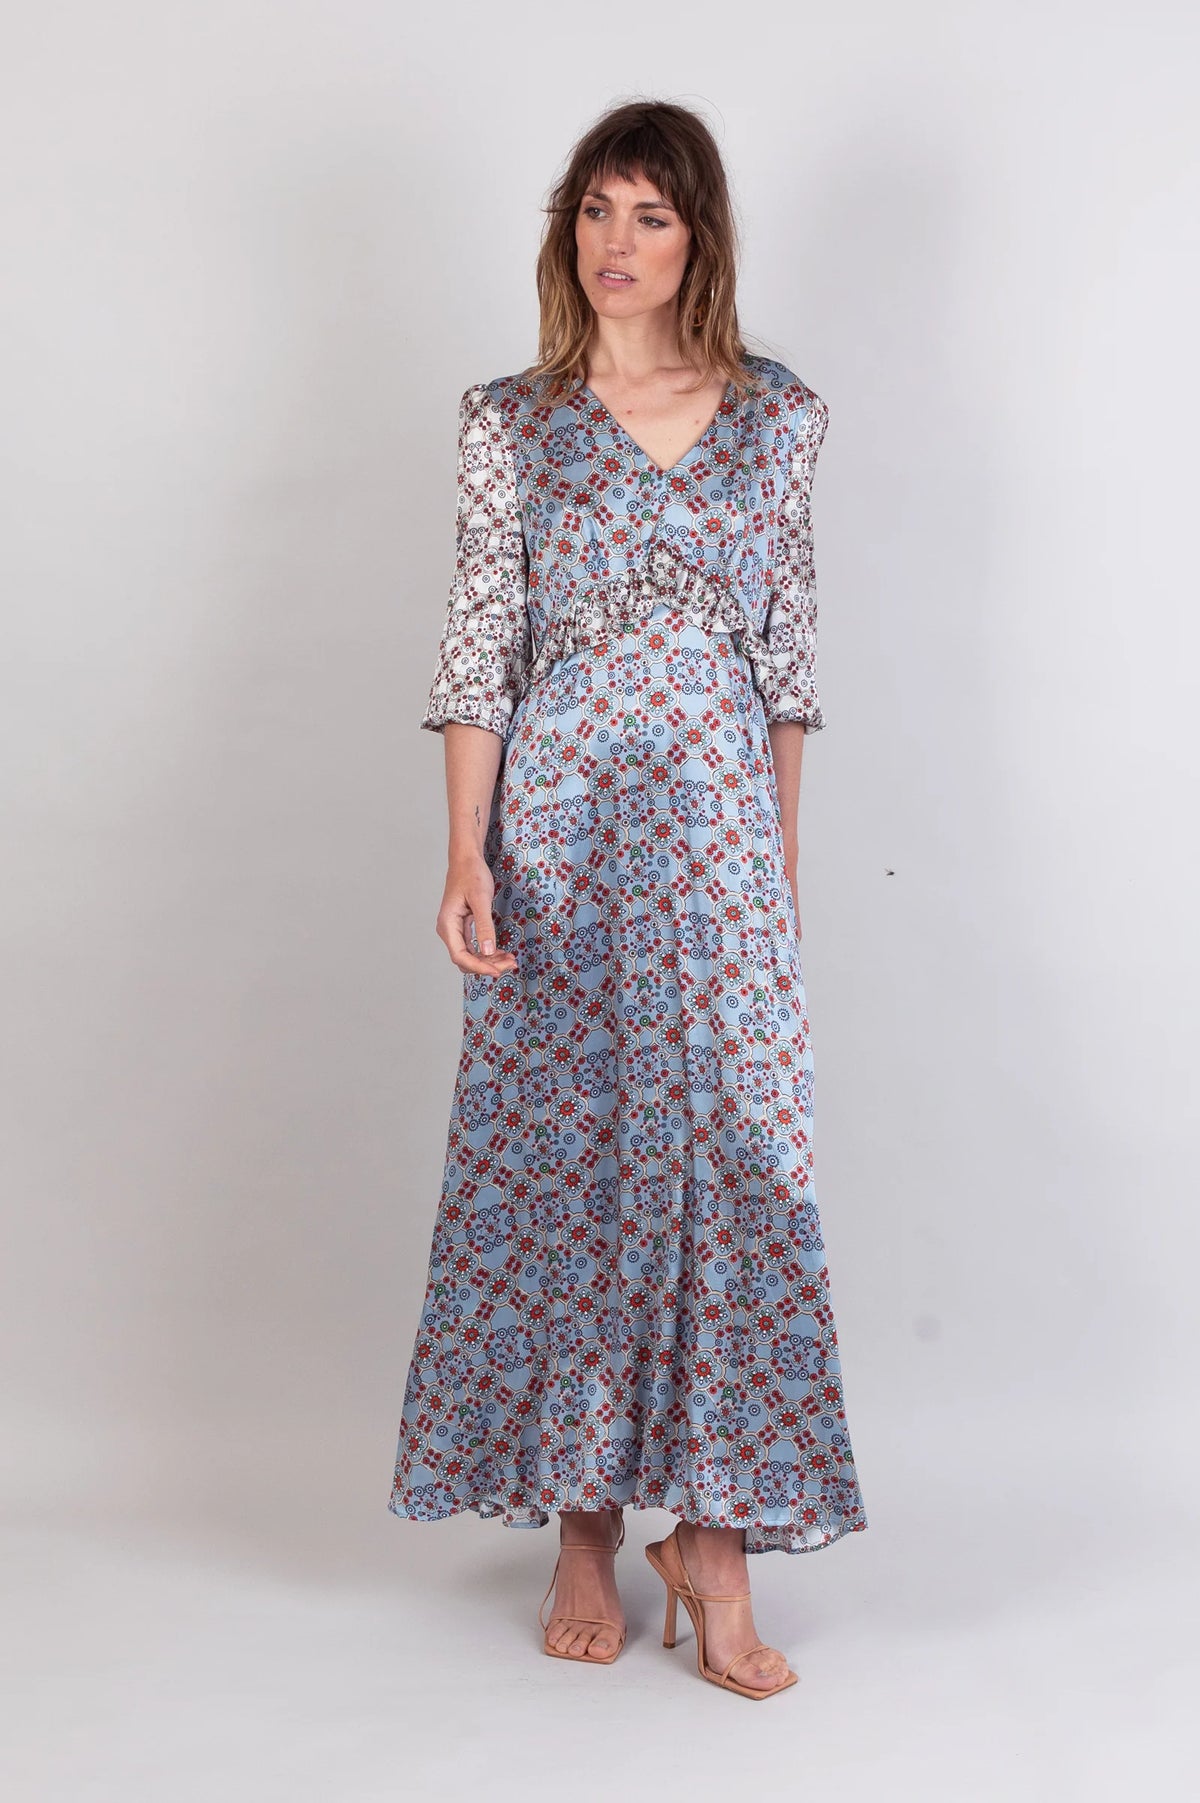 Oyster silk dress in a tile print with a long sleeve and ruffle detail